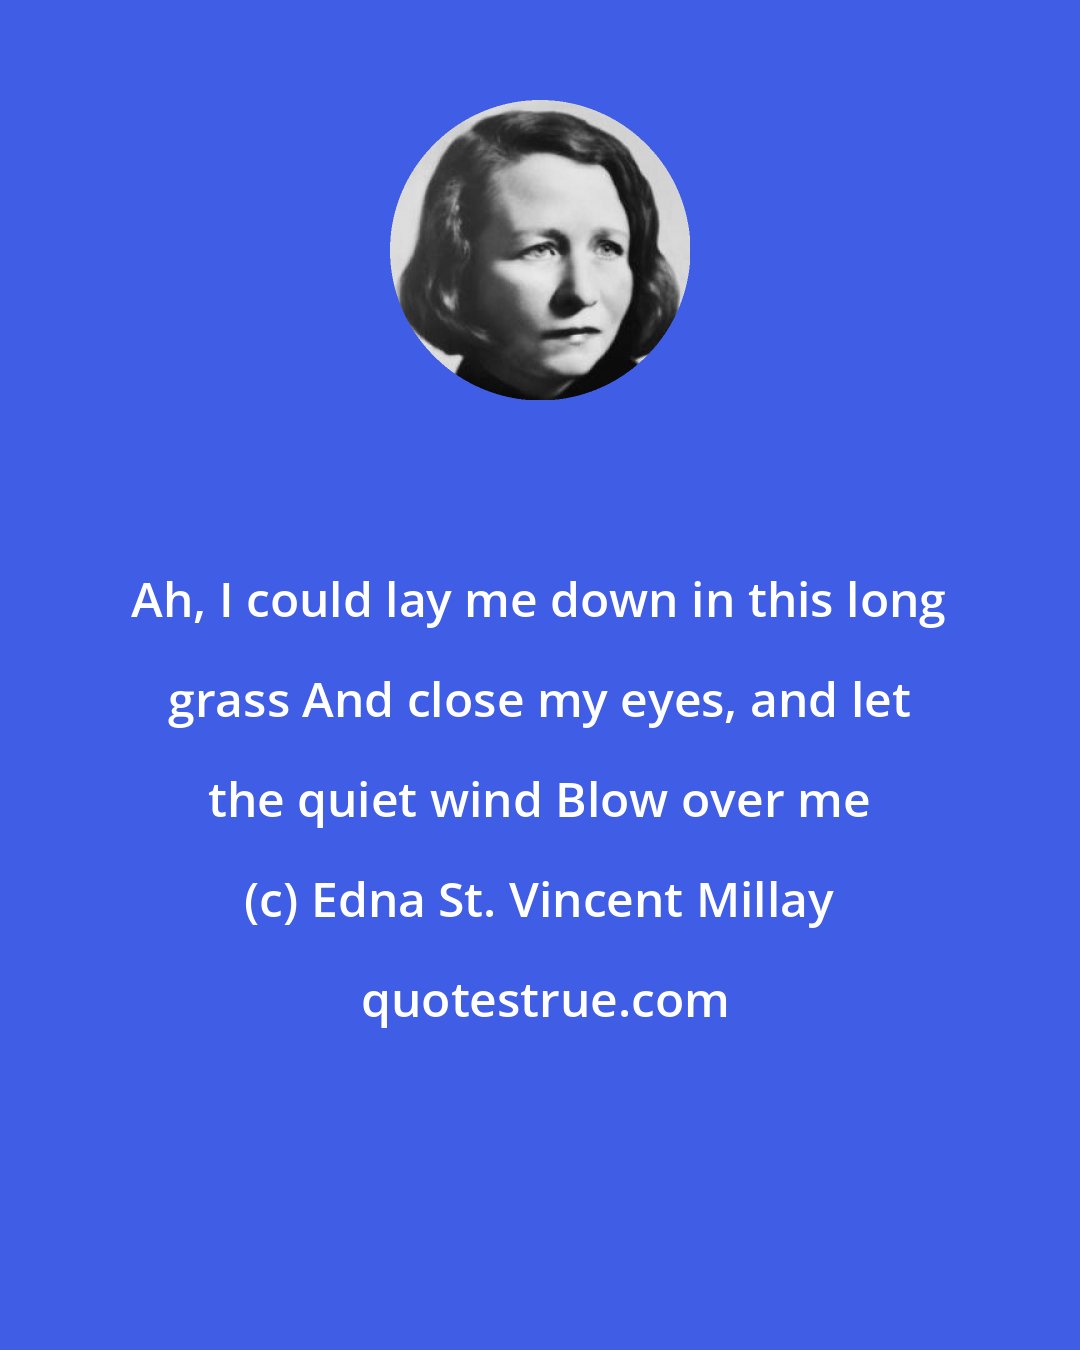 Edna St. Vincent Millay: Ah, I could lay me down in this long grass And close my eyes, and let the quiet wind Blow over me